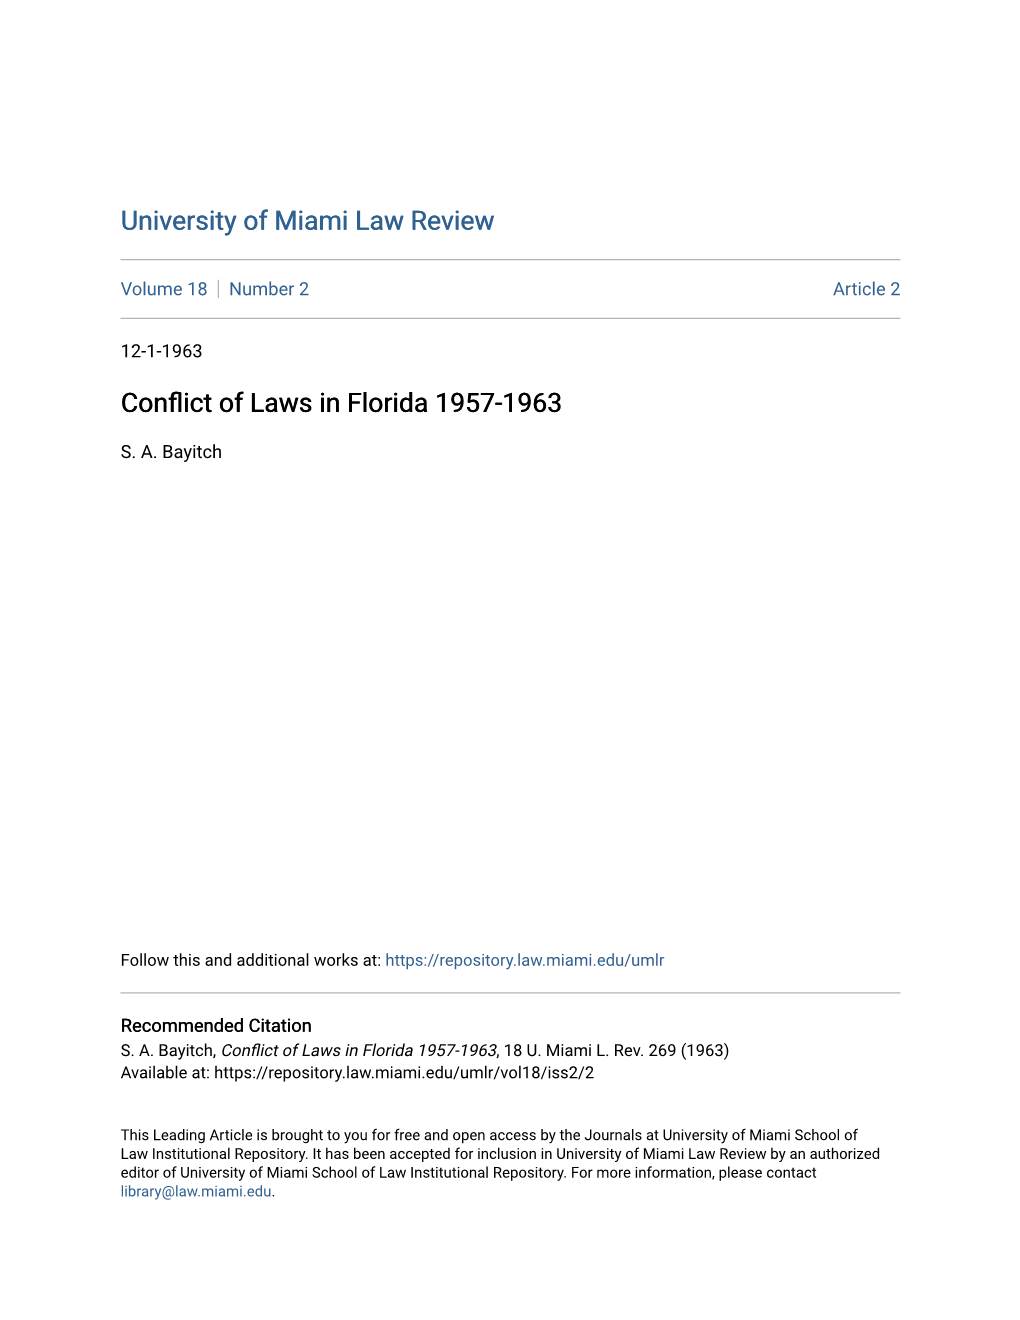 Conflict of Laws in Florida 1957-1963